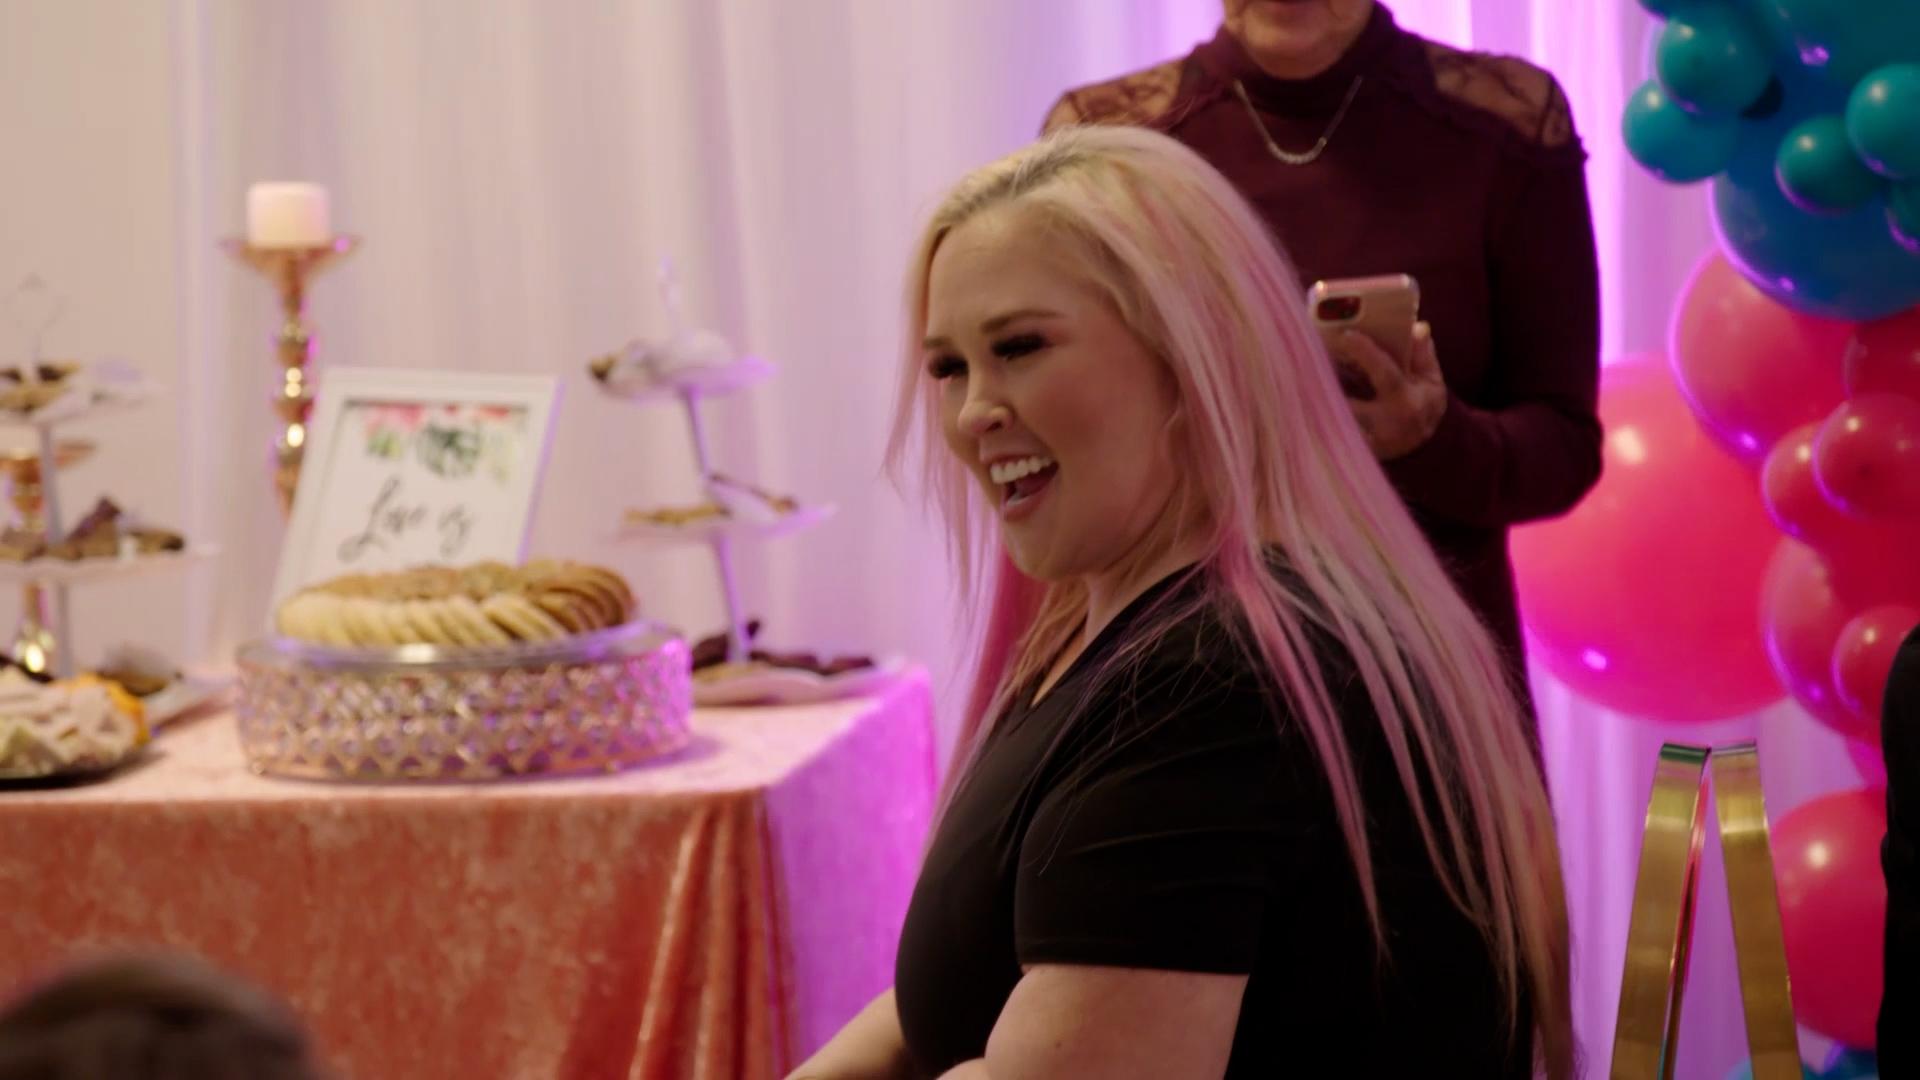 Watch Sneak Peek: June's Bridal Shower Crashed by Cops?! | Mama June: From Not to Hot Video Extras